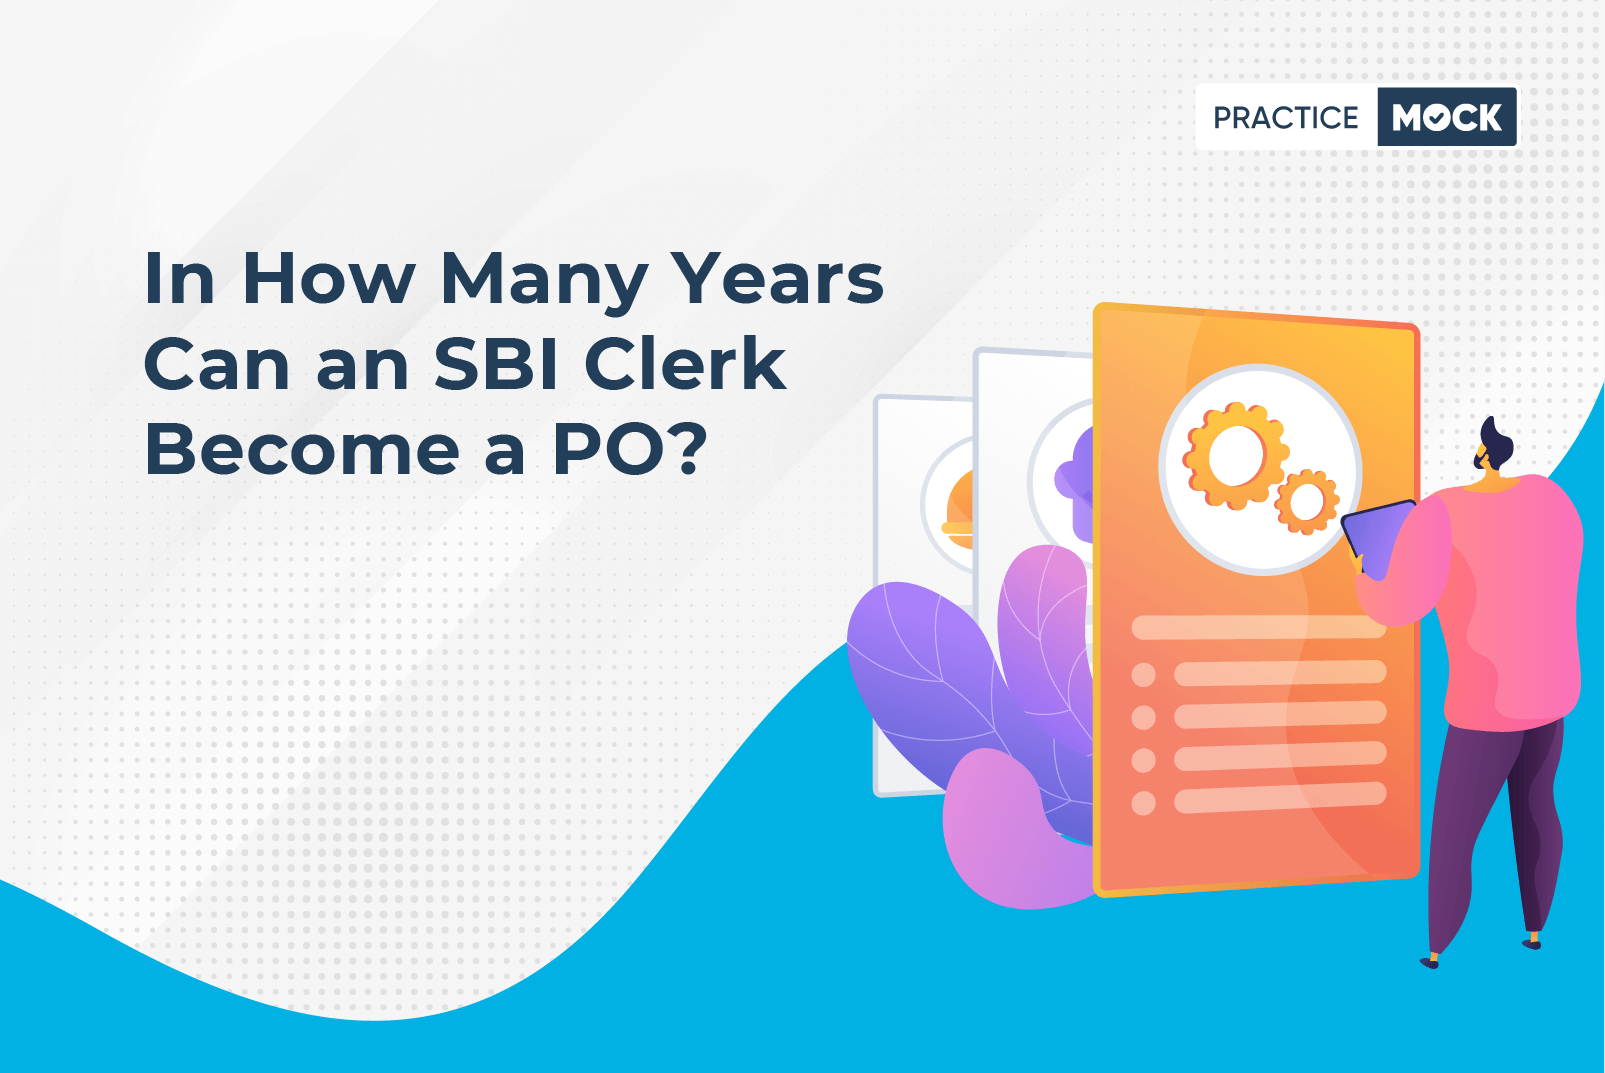 Can an SBI Clerk Become SBI PO?